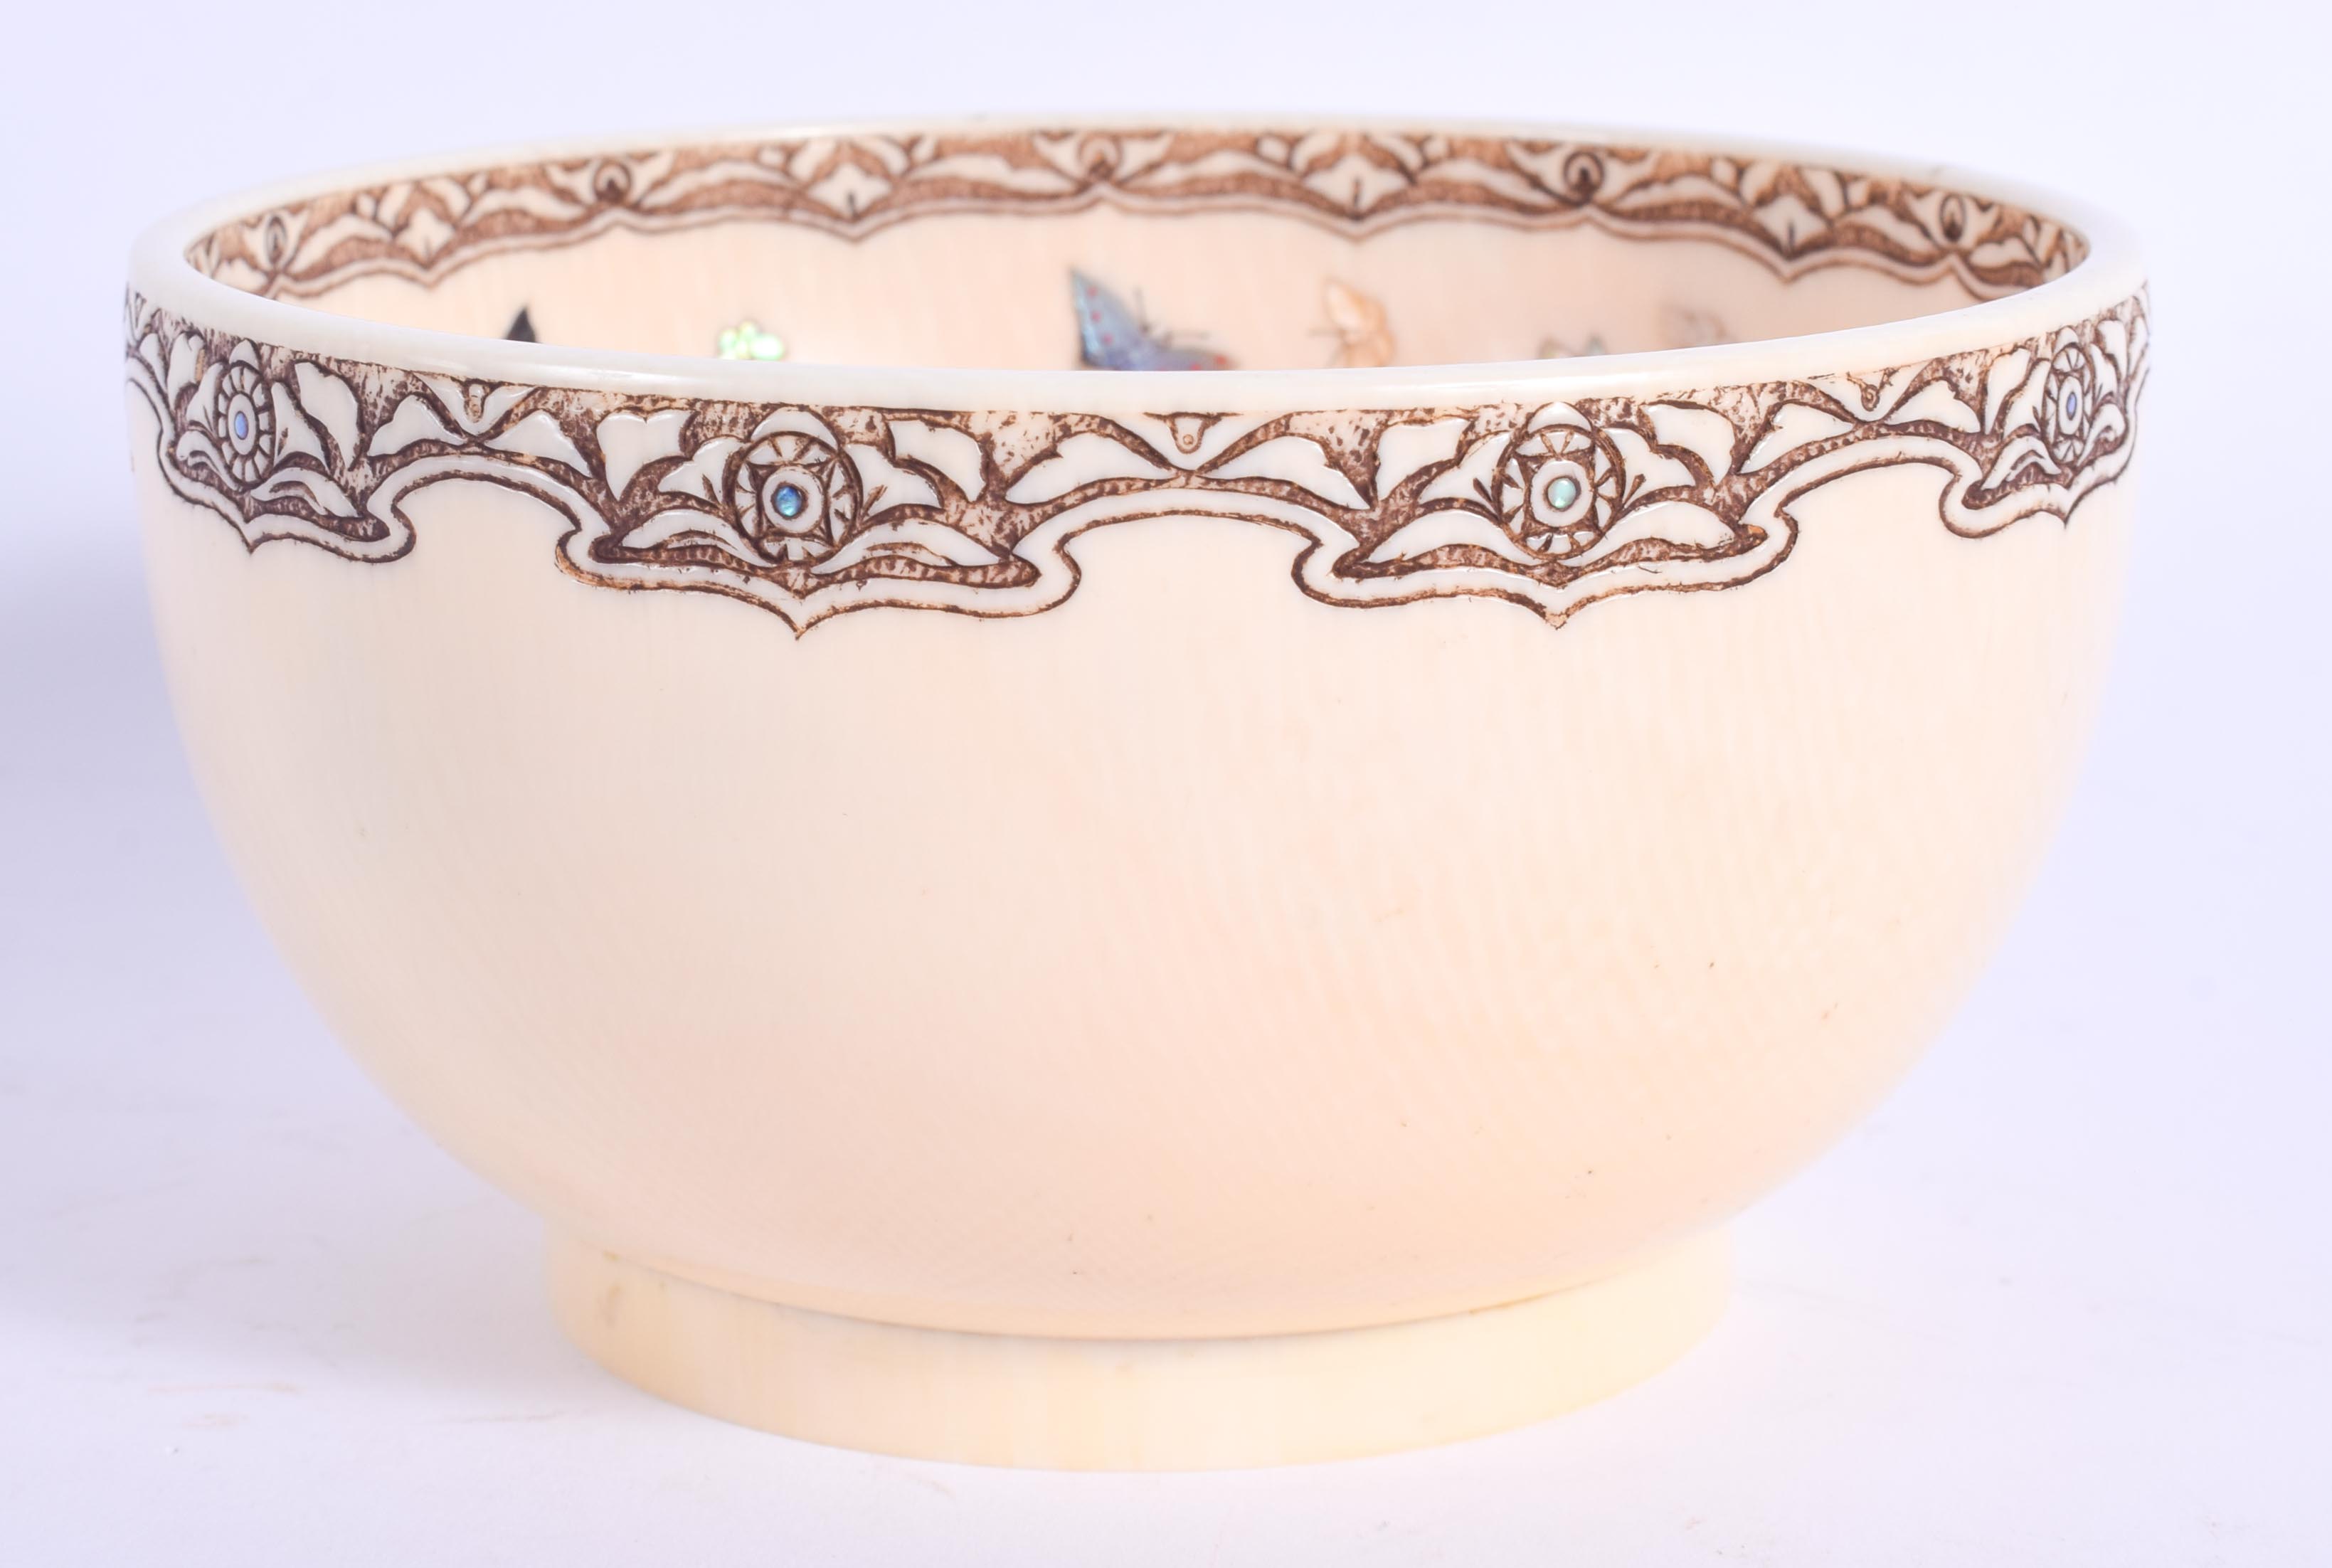 A FINE 19TH CENTURY JAPANESE MEIJI PERIOD CARVED SHIBAYAMA IVORY BOWL wonderfully decorated with but - Image 3 of 11